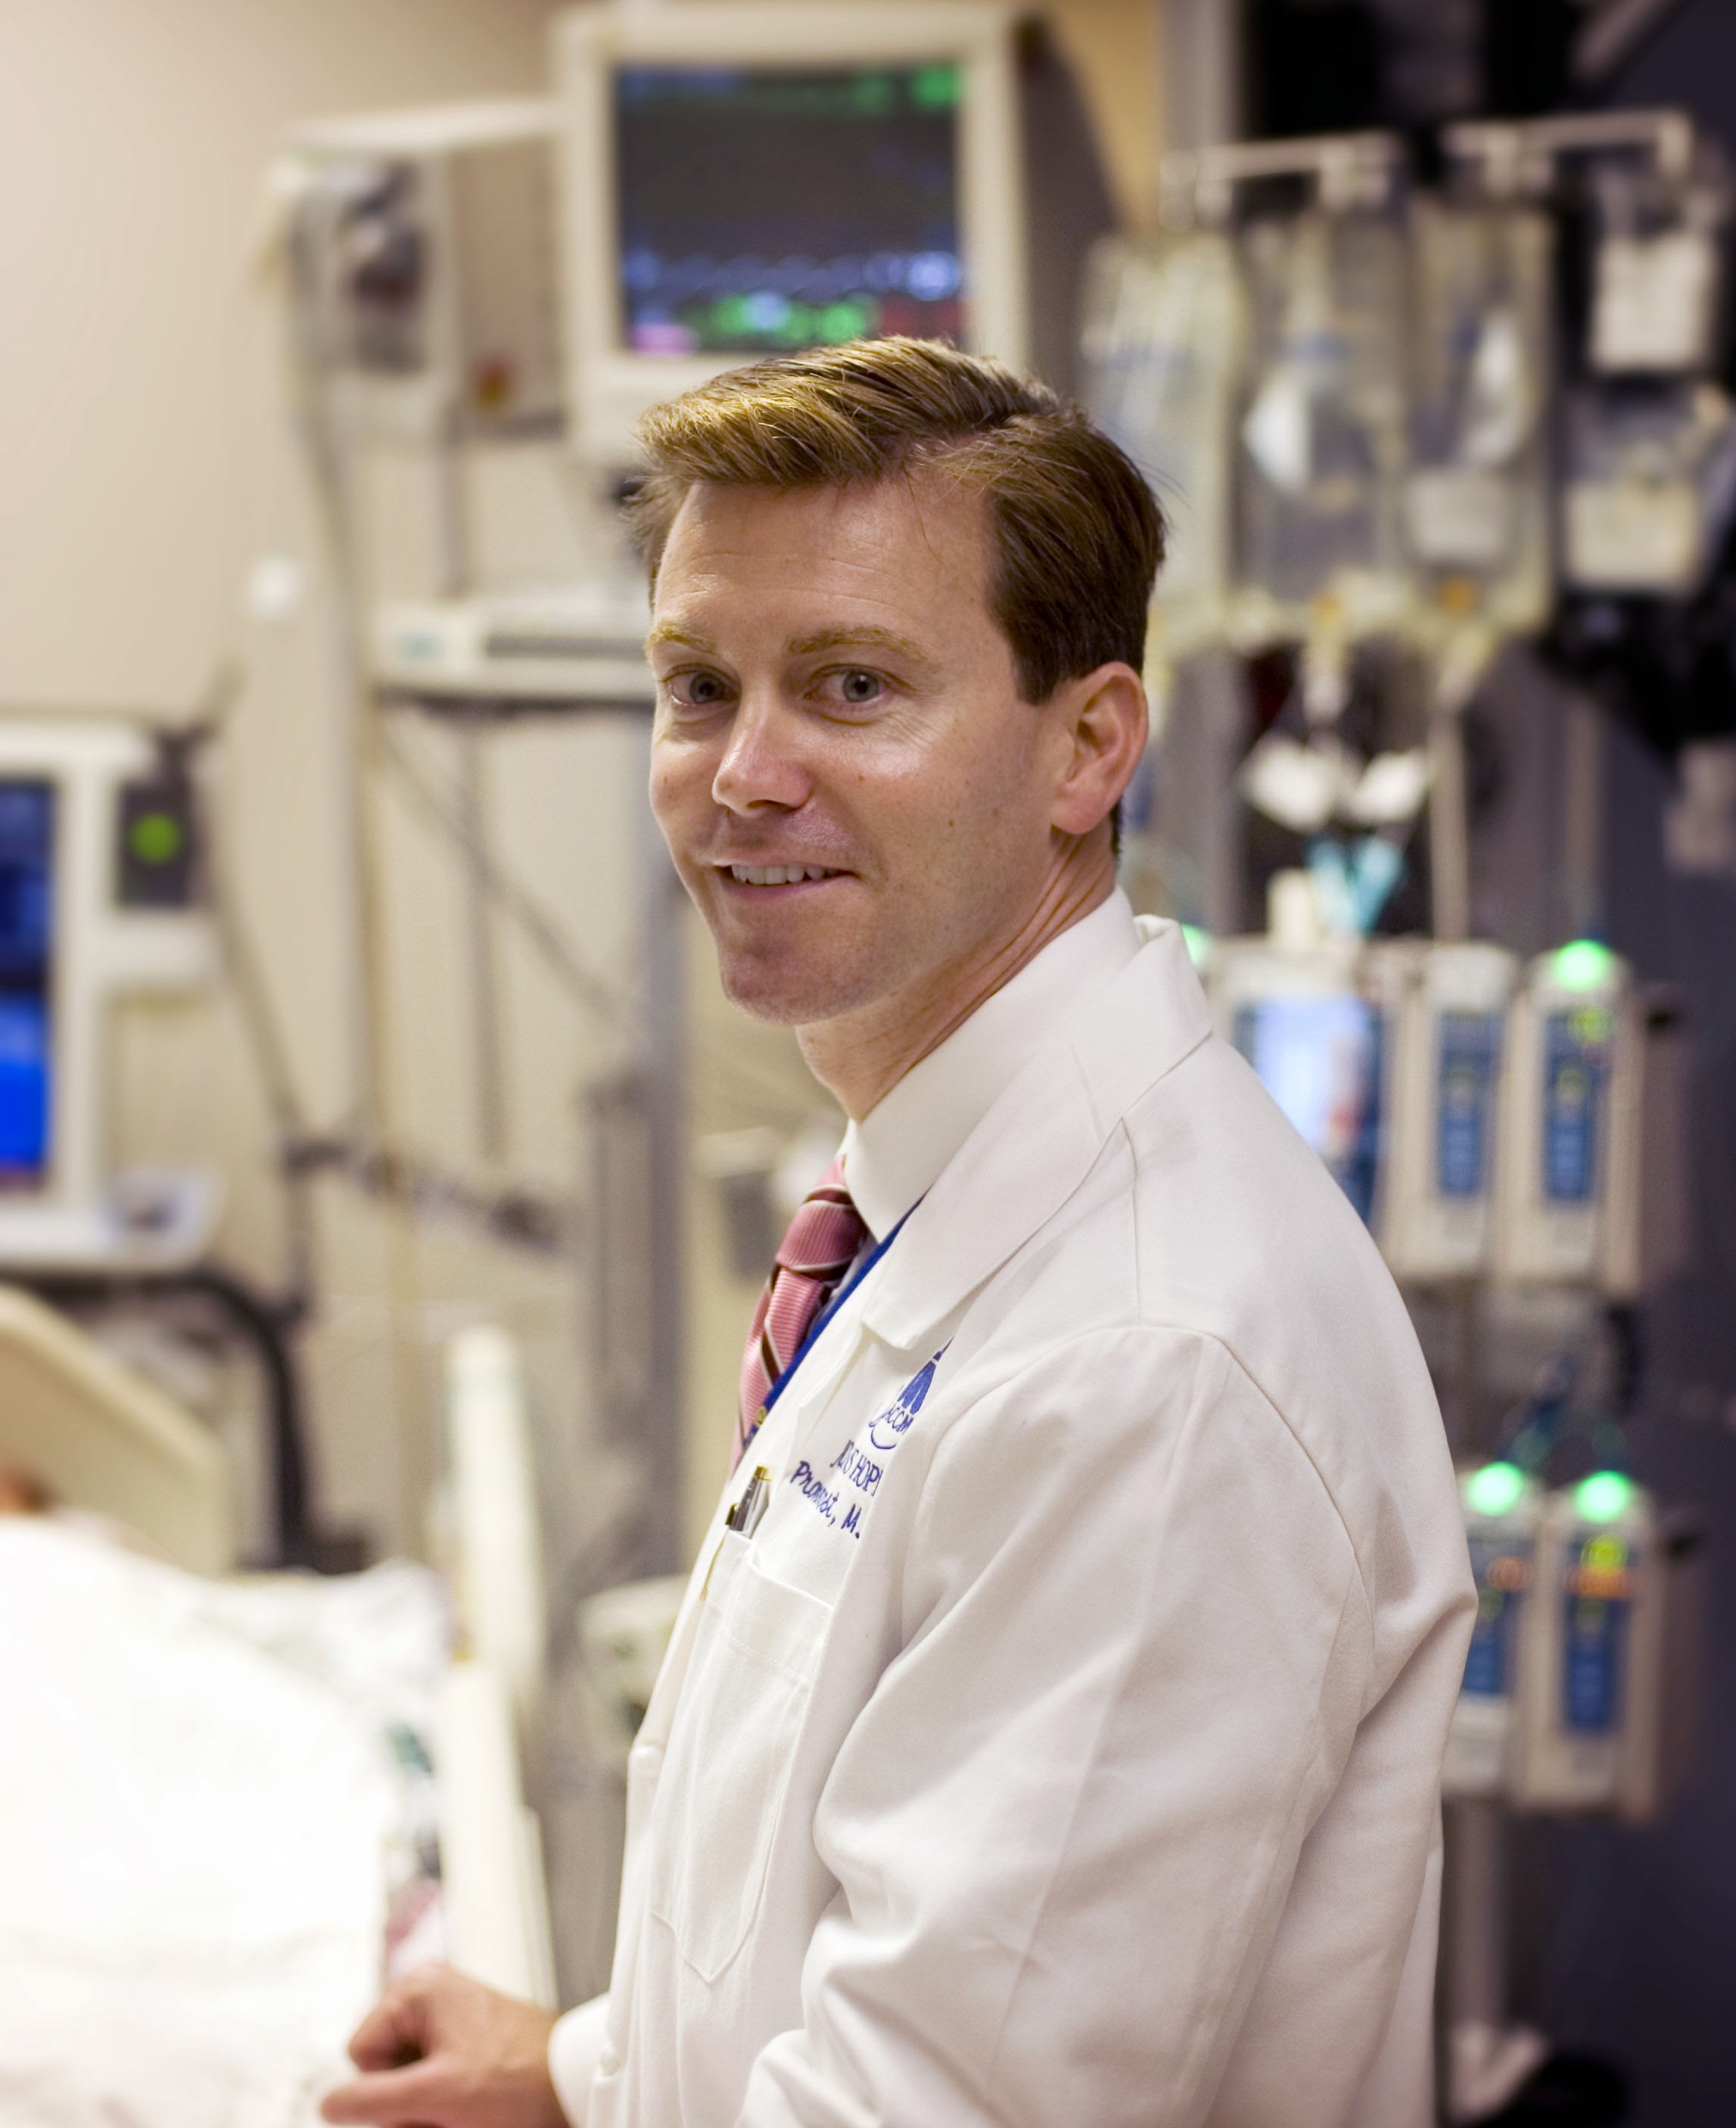 Photo of Peter Pronovost, M.D., Ph.D., senior vice president of patient safety and quality for Johns Hopkins Medicine and director of the Armstrong Institute.